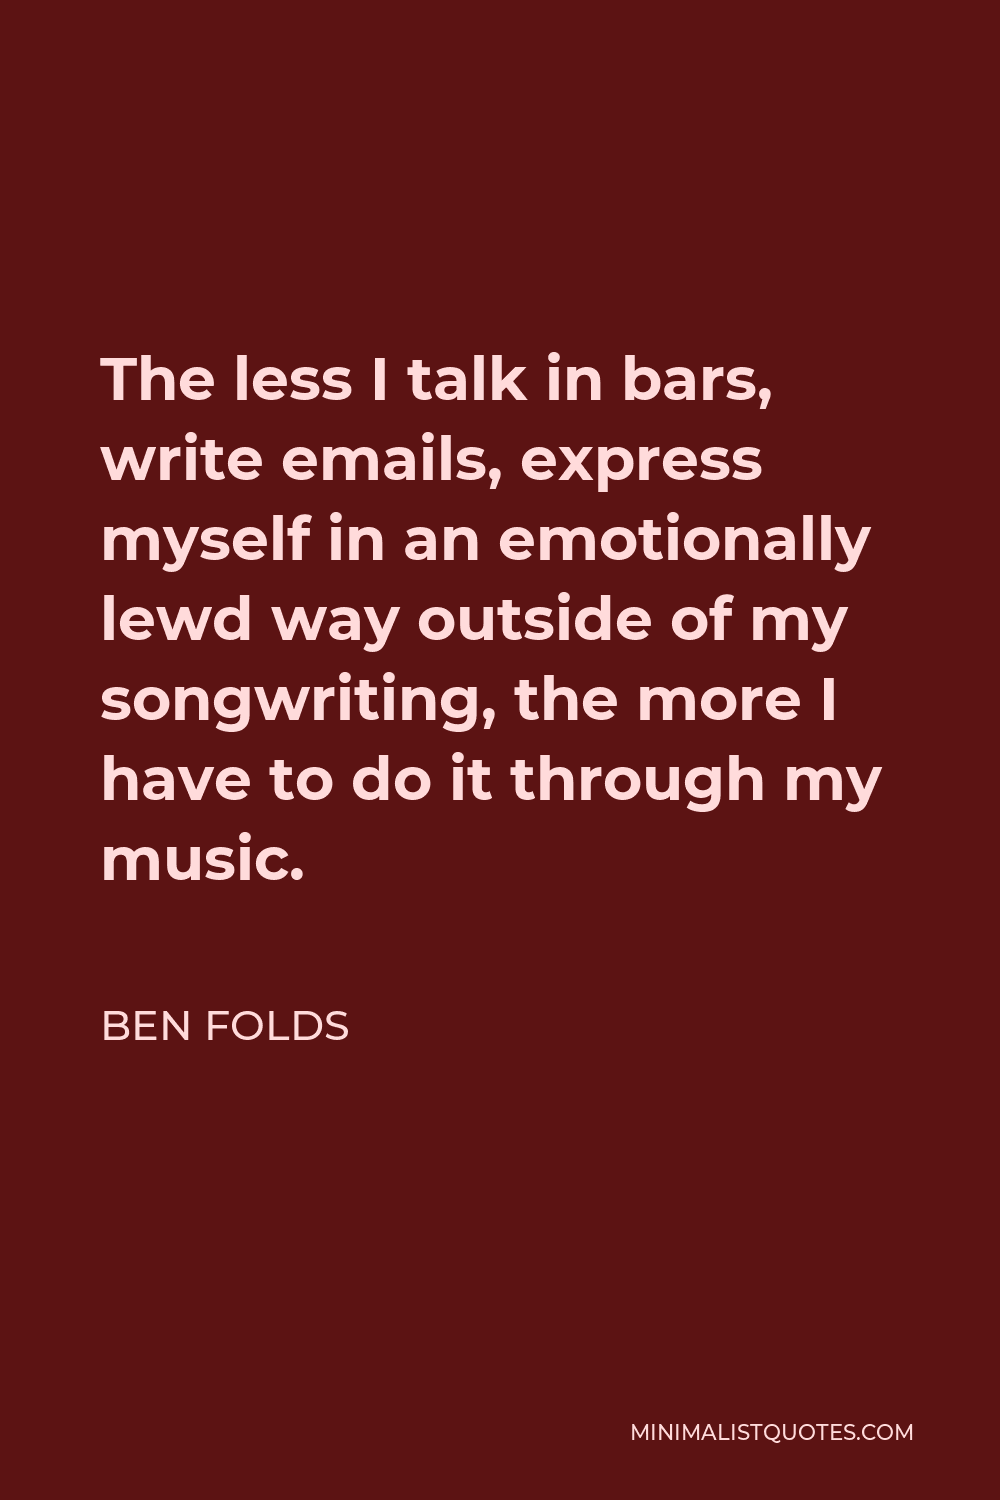 Ben Folds Quote - The less I talk in bars, write emails, express myself in an emotionally lewd way outside of my songwriting, the more I have to do it through my music.